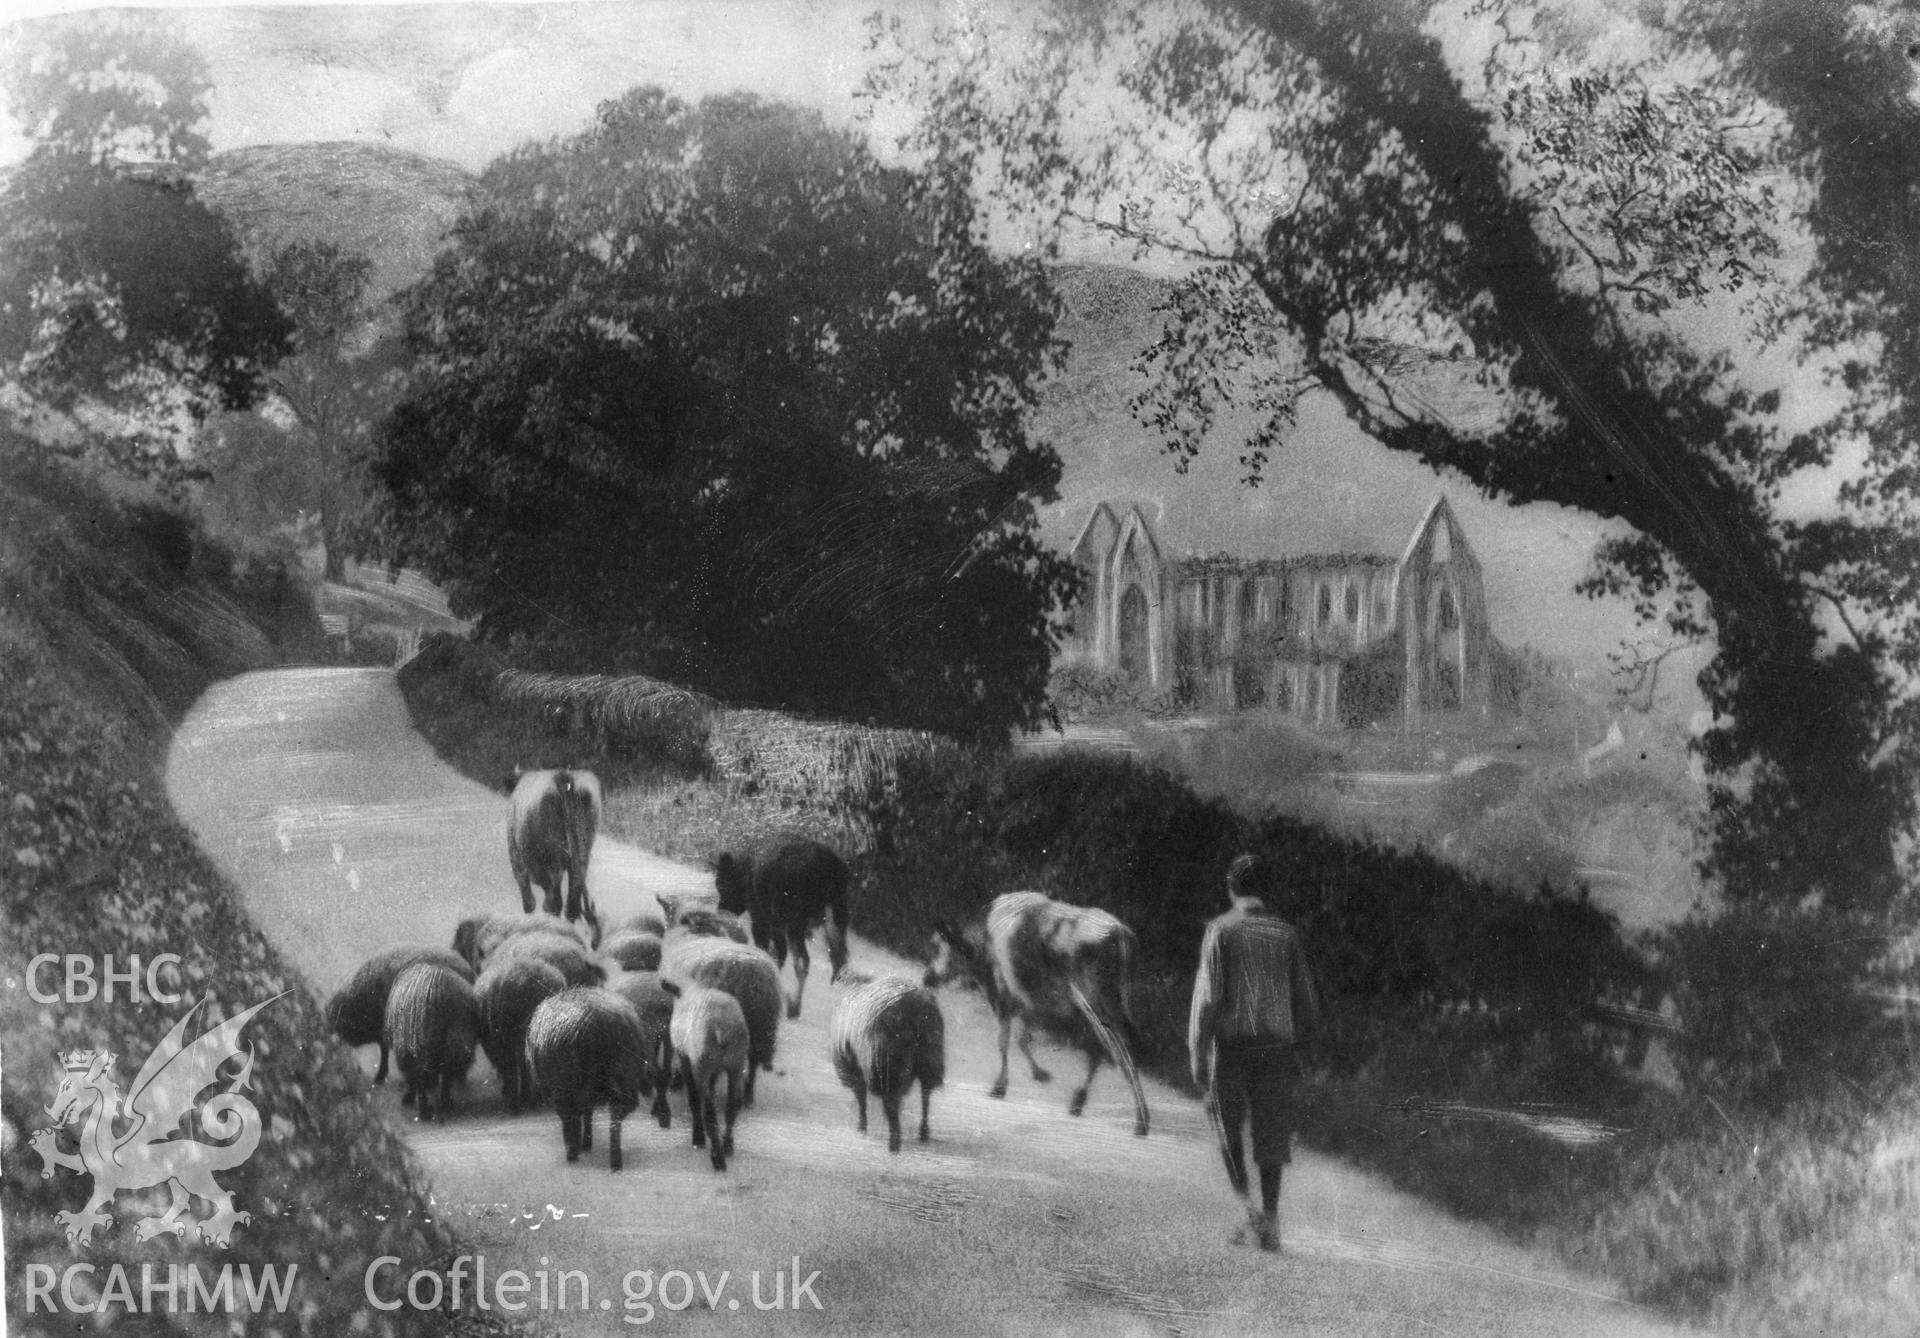 View of shepherd and flock on the road near Tintern Abbey., taken by W A Call.